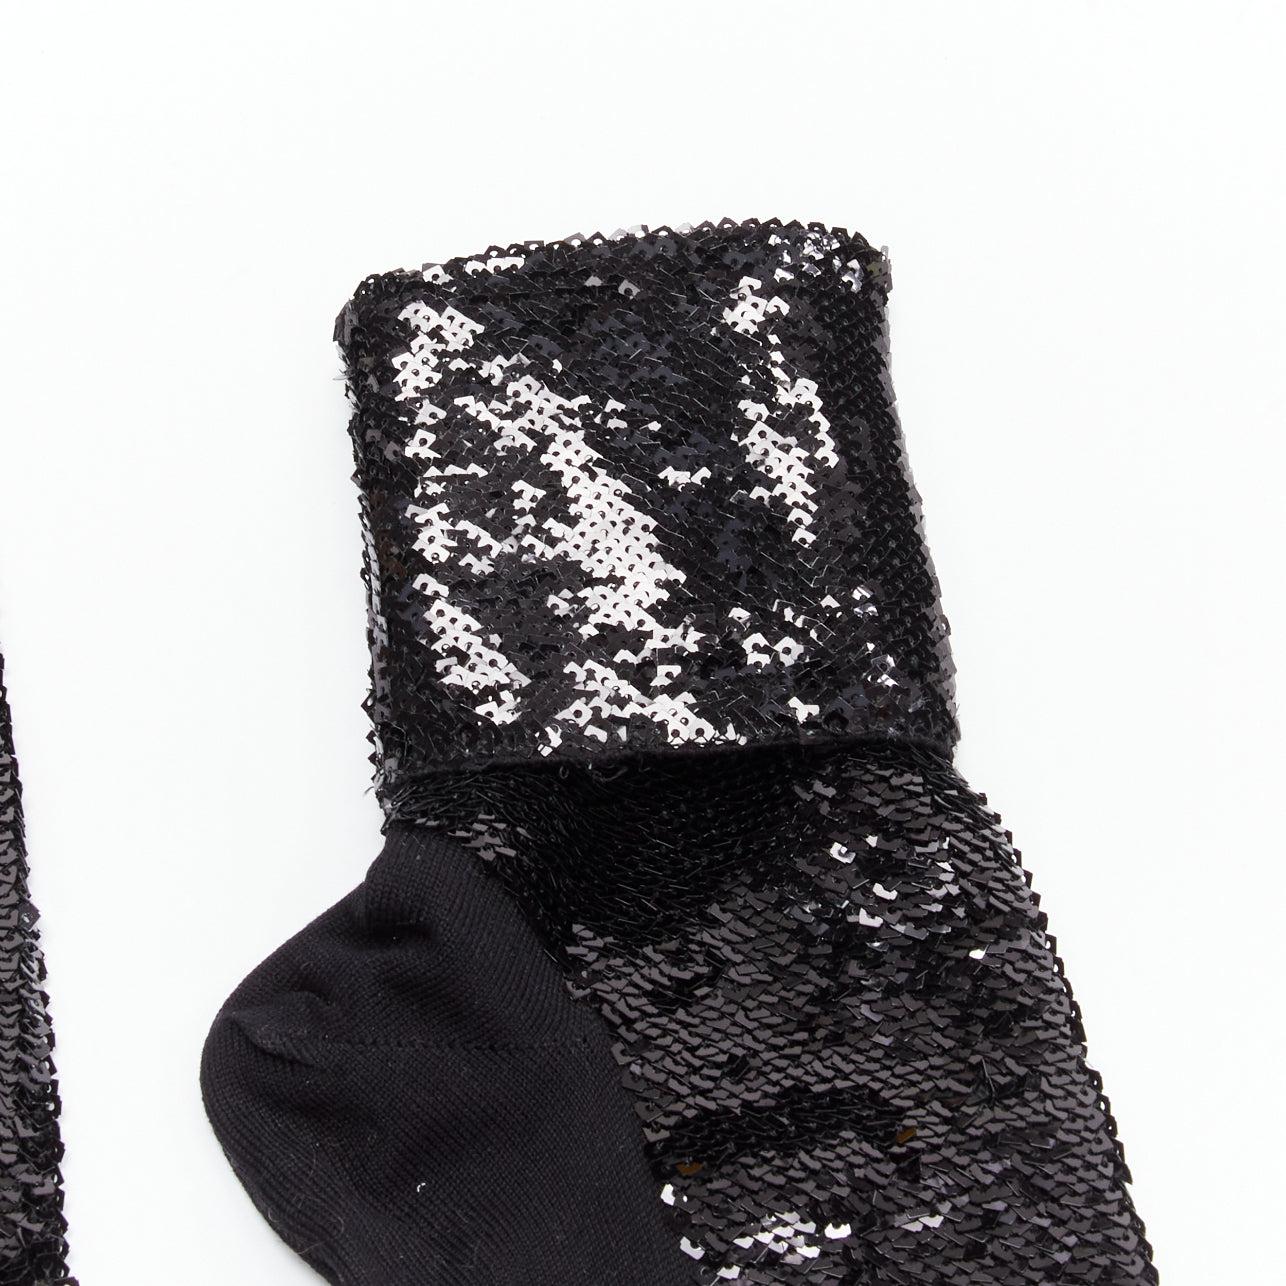 SAINT LAURENT 2016 black sequins cotton blend rolled cuffed socks EUR38
Reference: BSHW/A00129
Brand: Saint Laurent
Designer: Anthony Vaccarello
Collection: 2016
Material: Cotton, Blend
Color: Black
Pattern: Solid
Closure: Pullover
Lining: Black